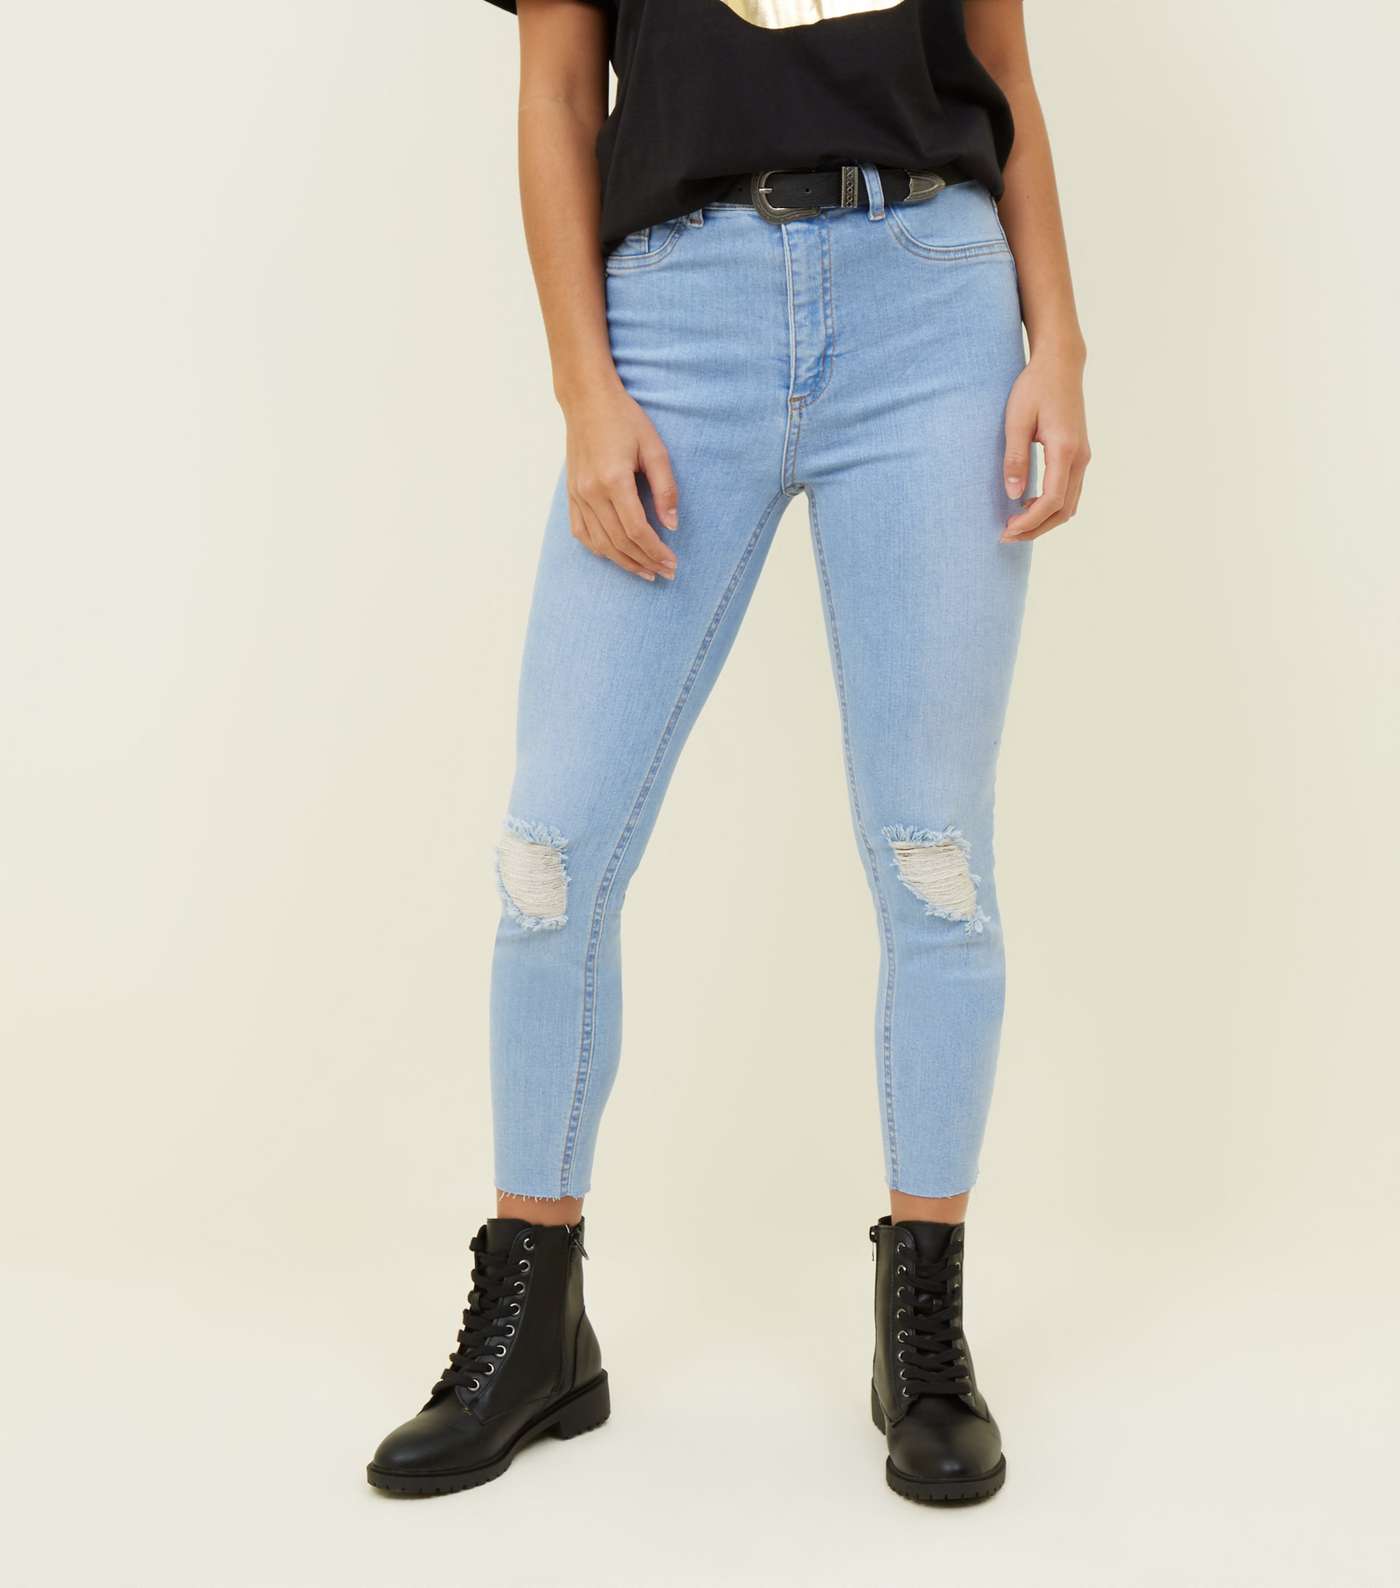 Petite Bright Blue Ripped Skinny Jeans  Image 2